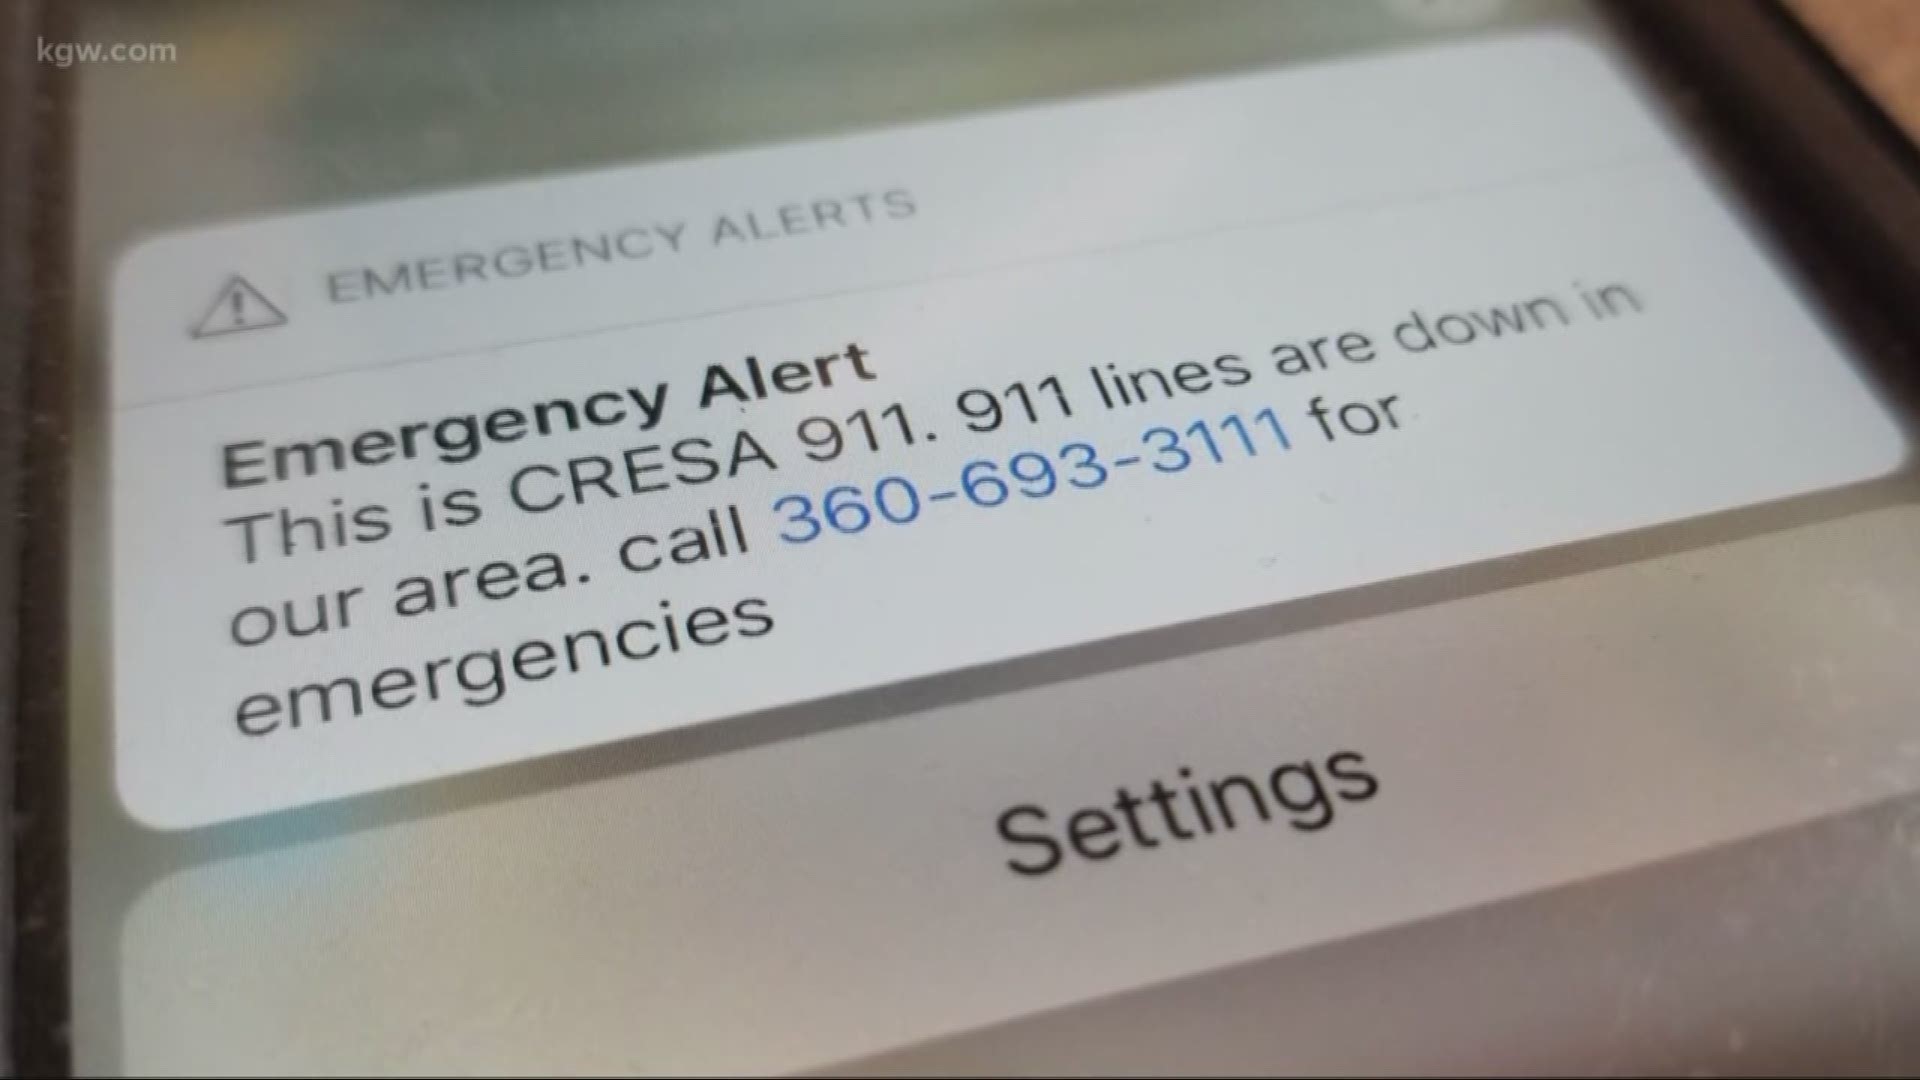 911 service restored in Clark County after late night alert confuses many people.